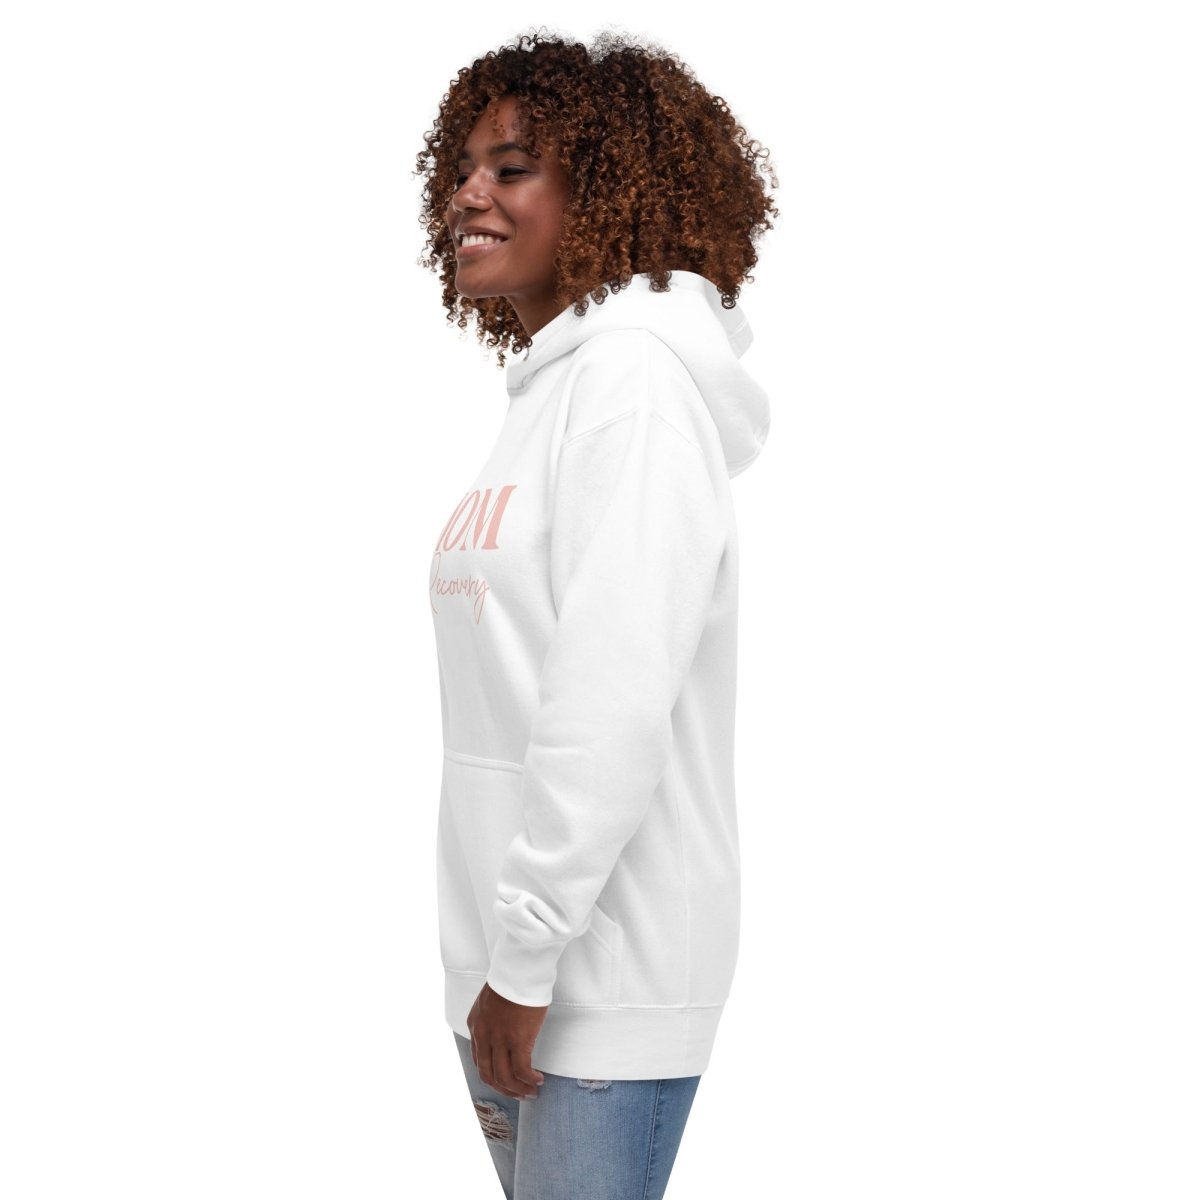 Mom's Recovery Hoodie - Clean & Sober